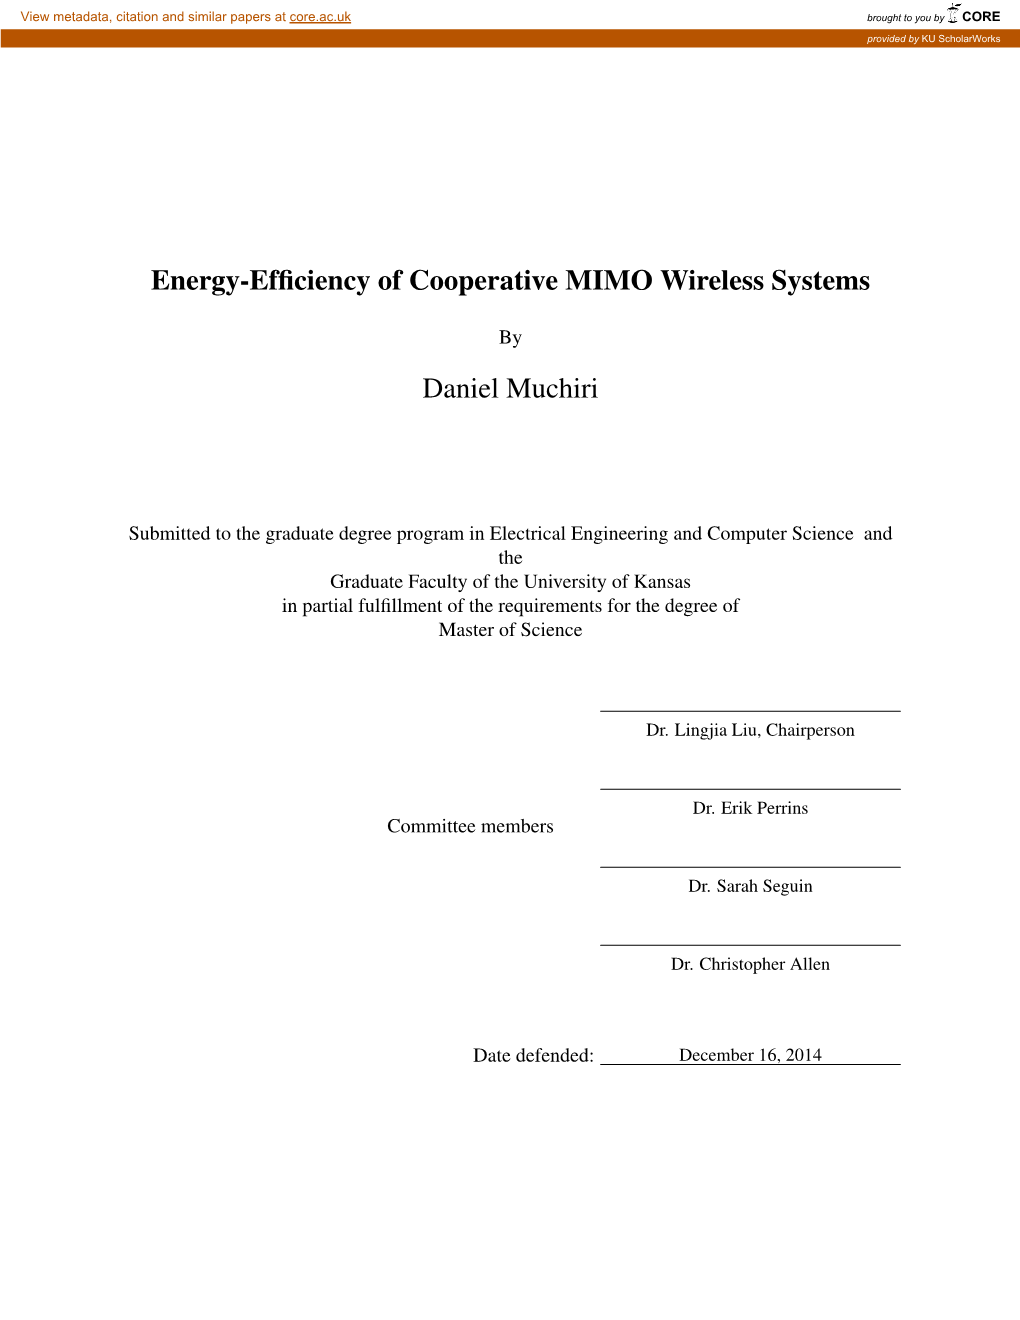 Energy-Efficiency of Cooperative MIMO Wireless Systems